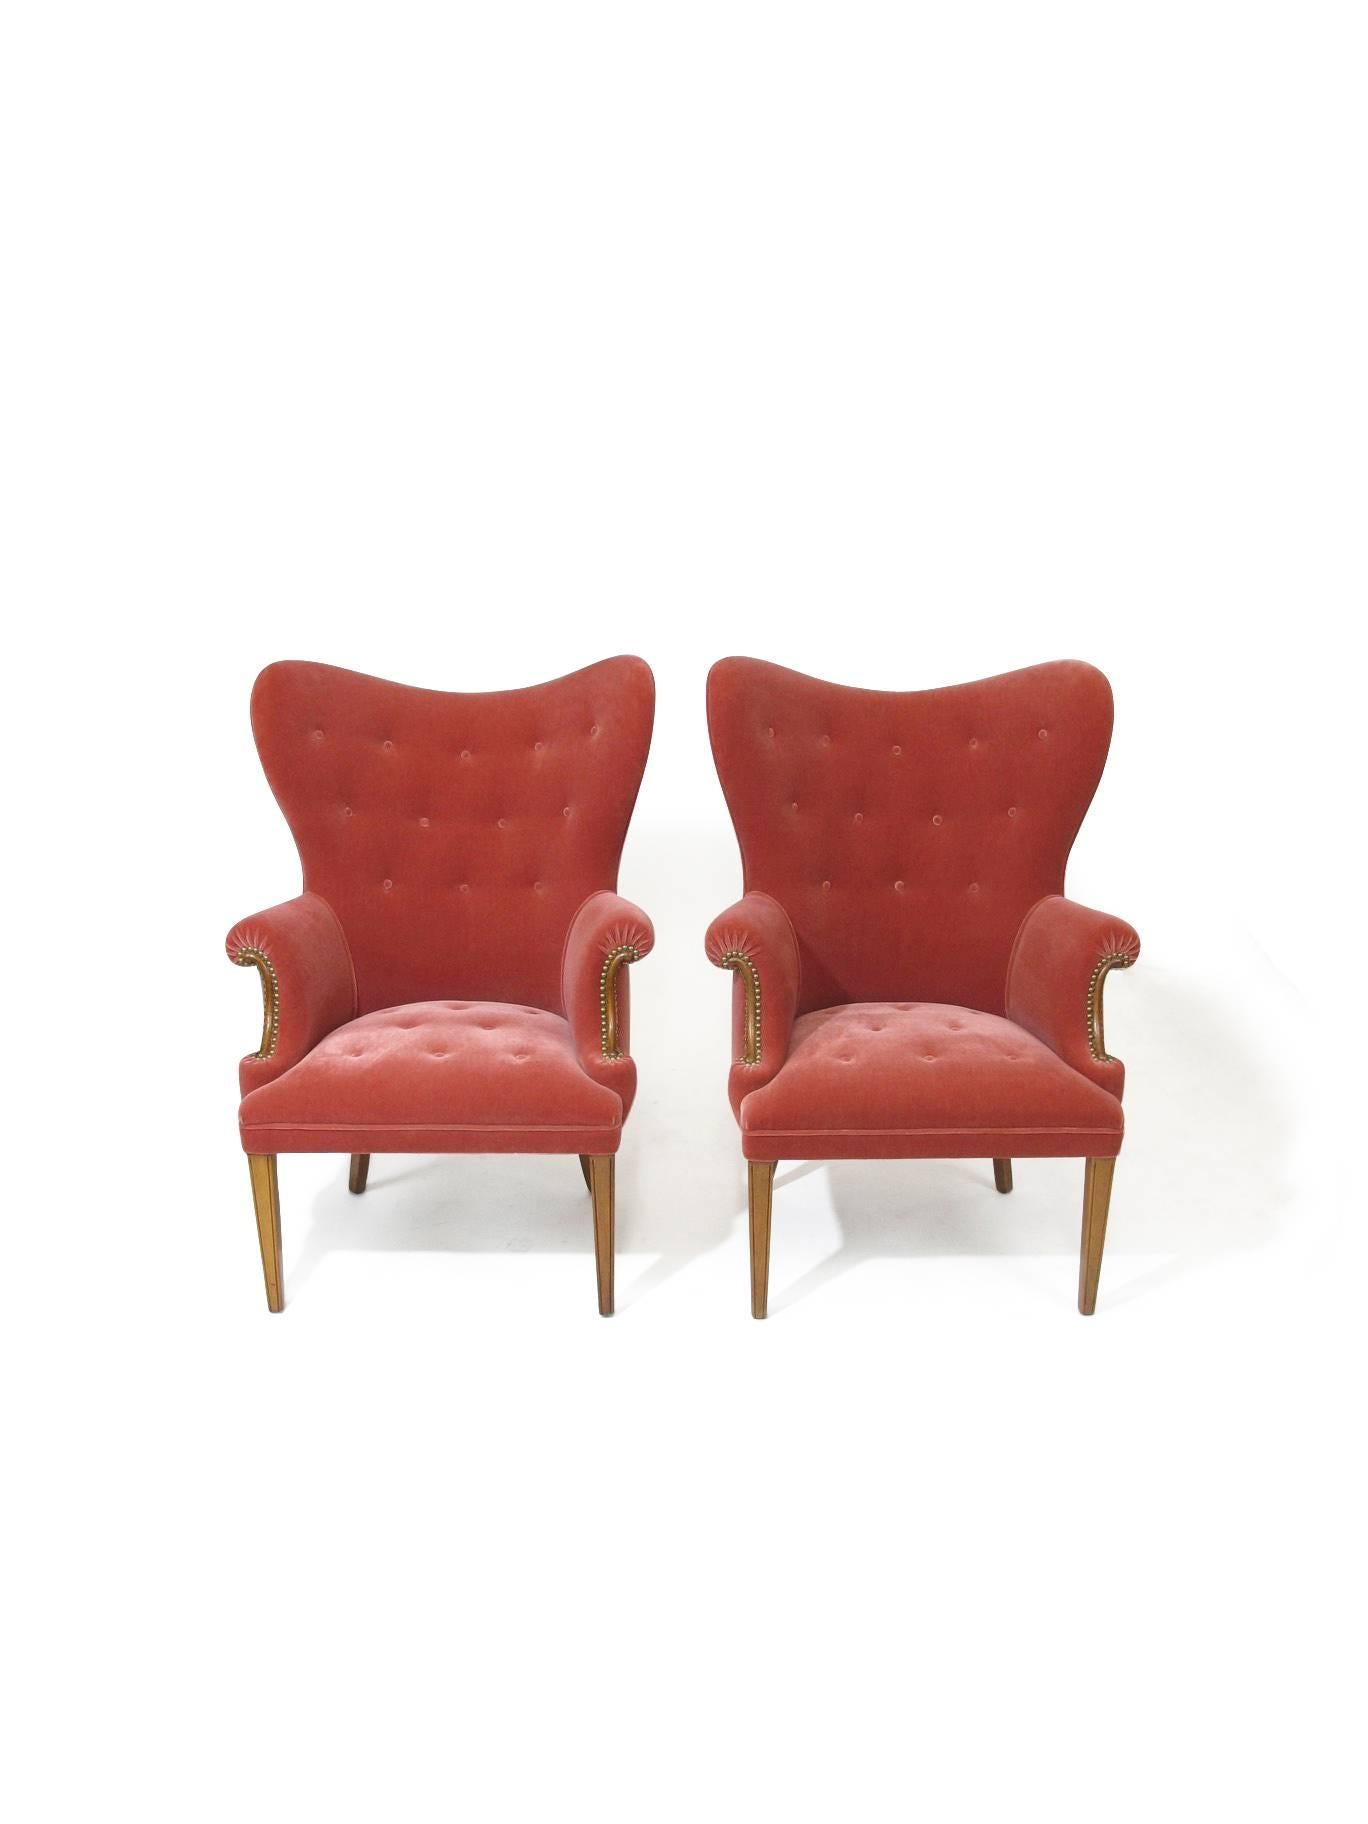 American Highback Pink Mohair Lounge Chairs